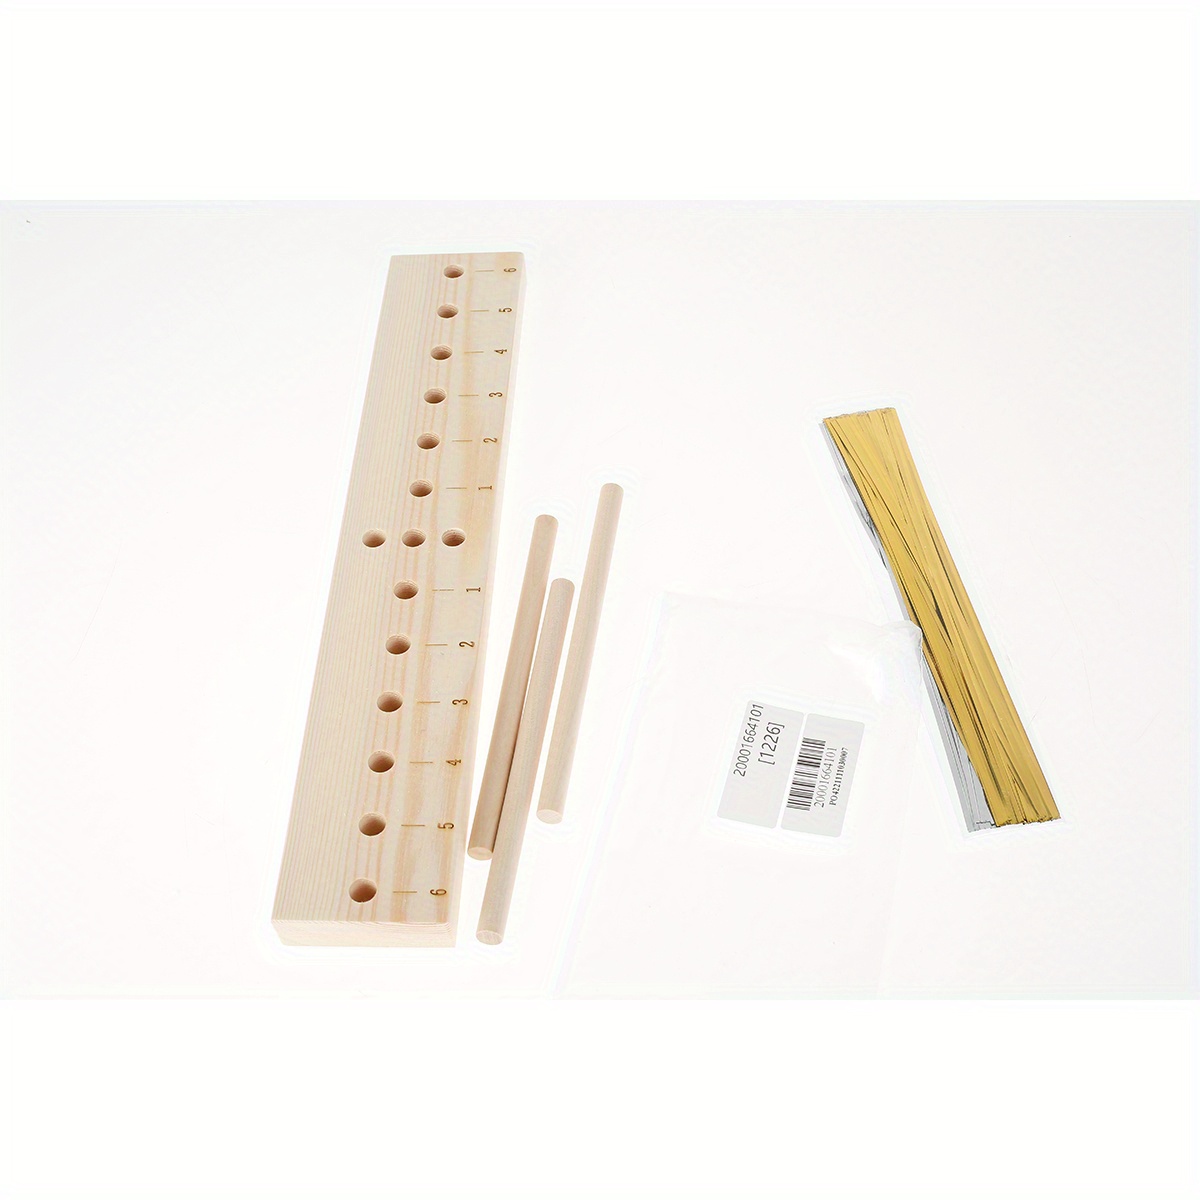 Wooden Bow Maker for Ribbon, Wooden Board Sticks Bow Making Kit for Making  Gift Bows DIY Wreath Ribbons Various Crafts